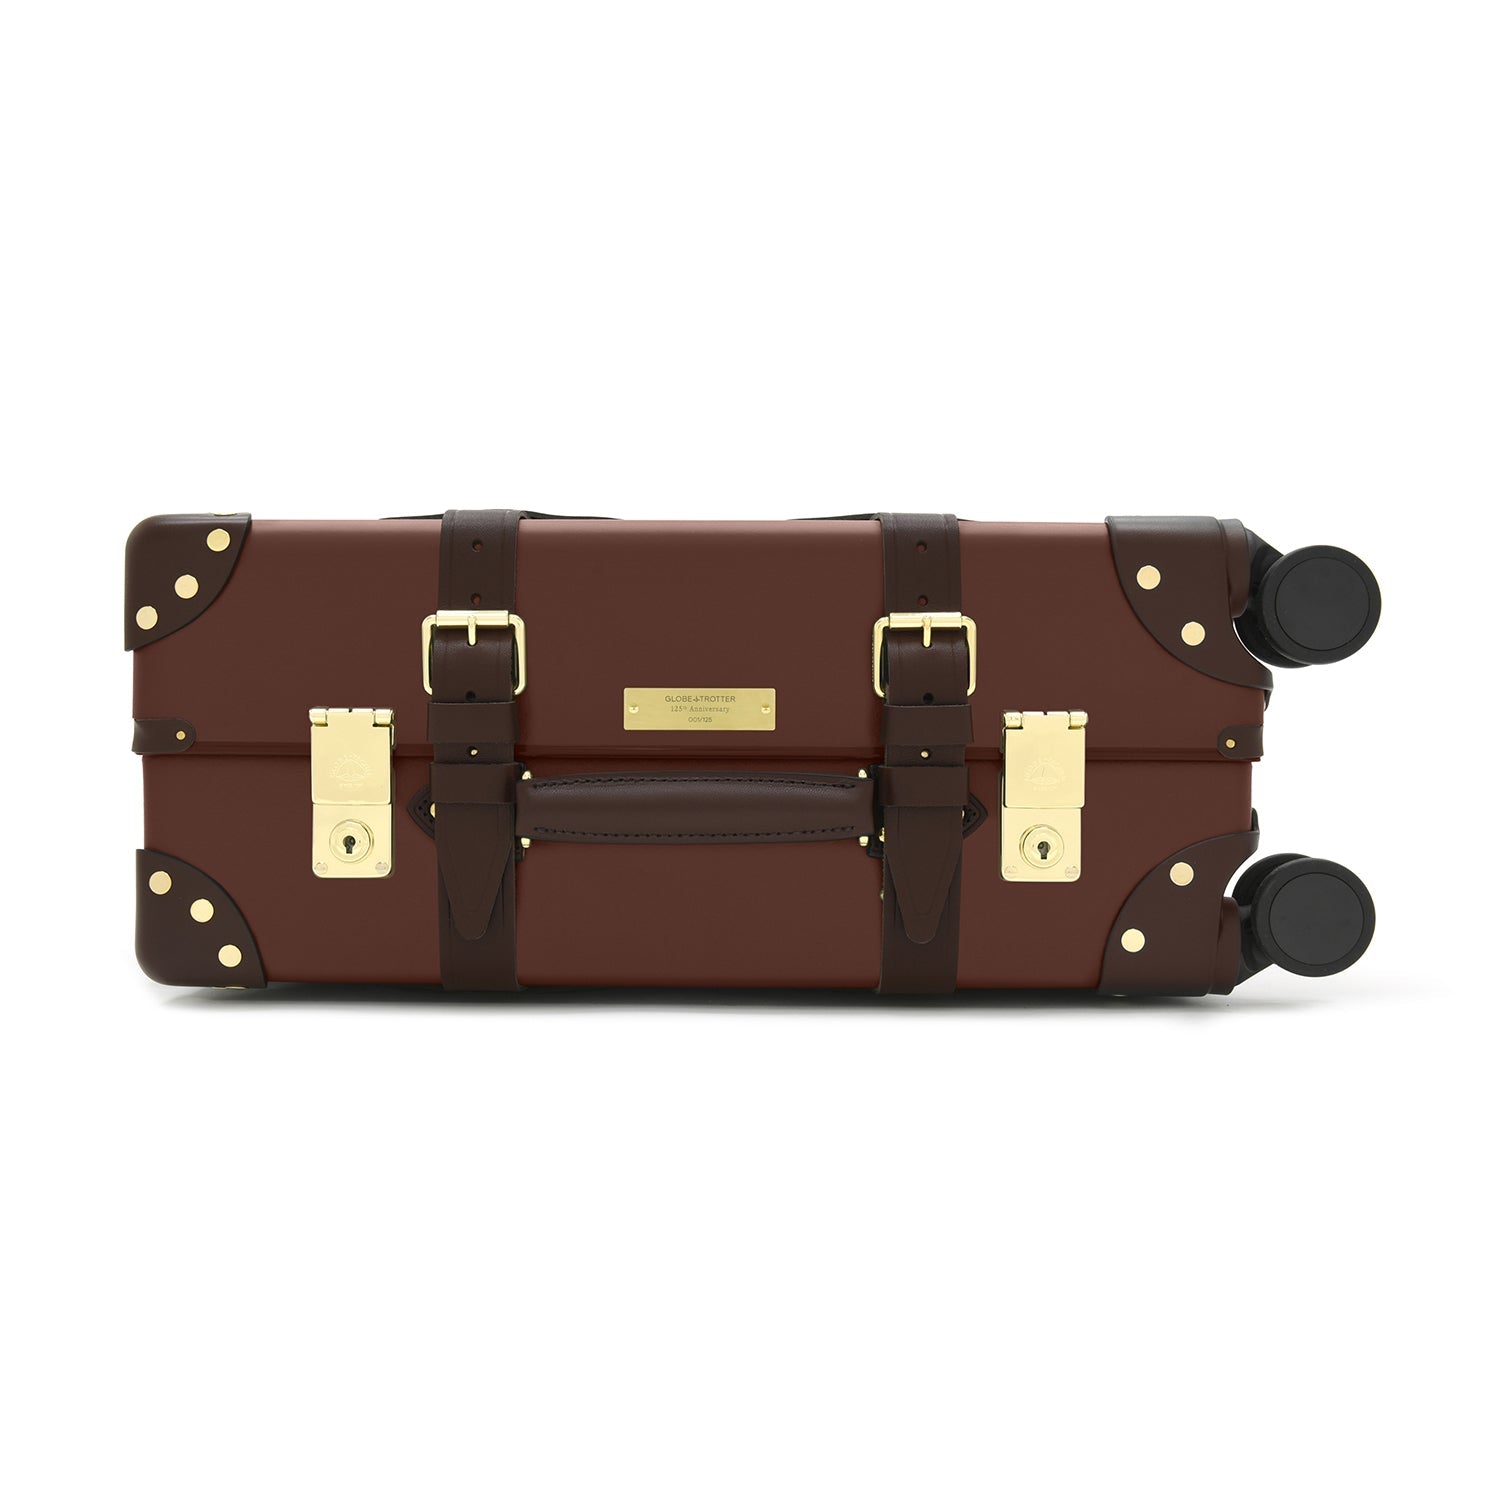 Centenary 125 · Carry-On - 4 Wheels | Heritage Brown/Brown - GLOBE-TROTTER